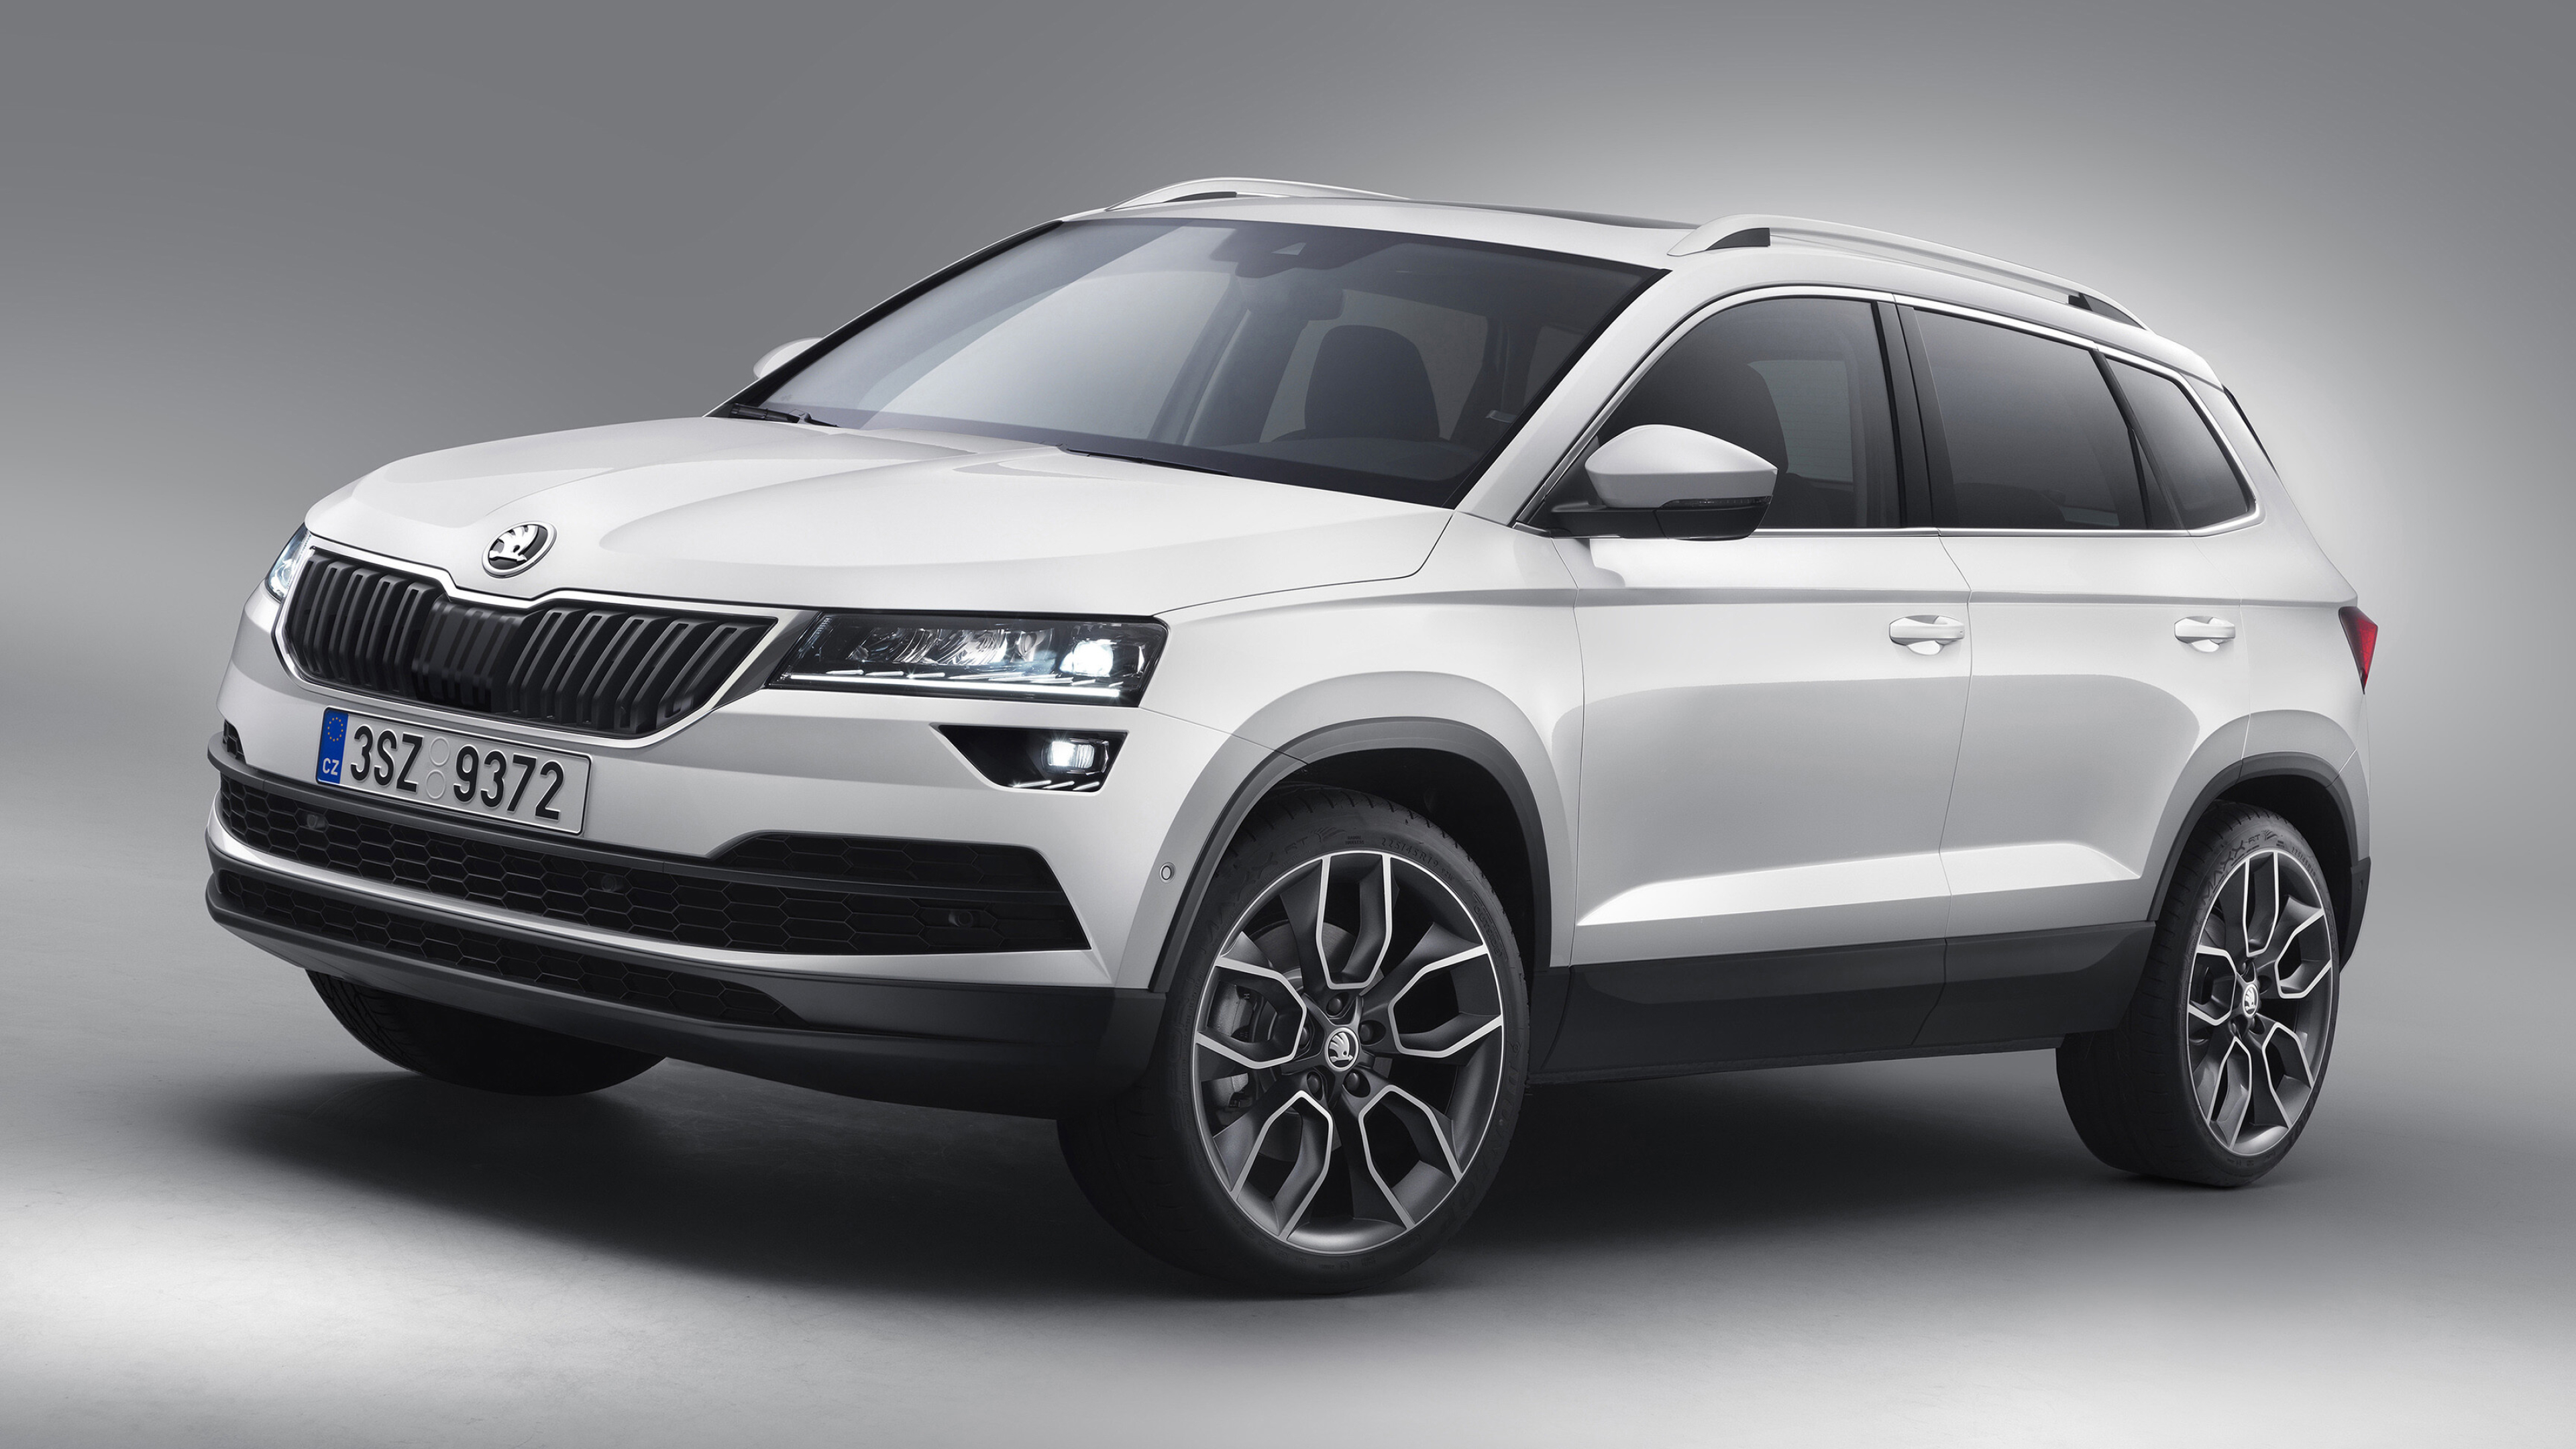 Skoda: Karoq, A compact crossover SUV designed and built by the Czech car manufacturer, 2017. 3840x2160 4K Background.